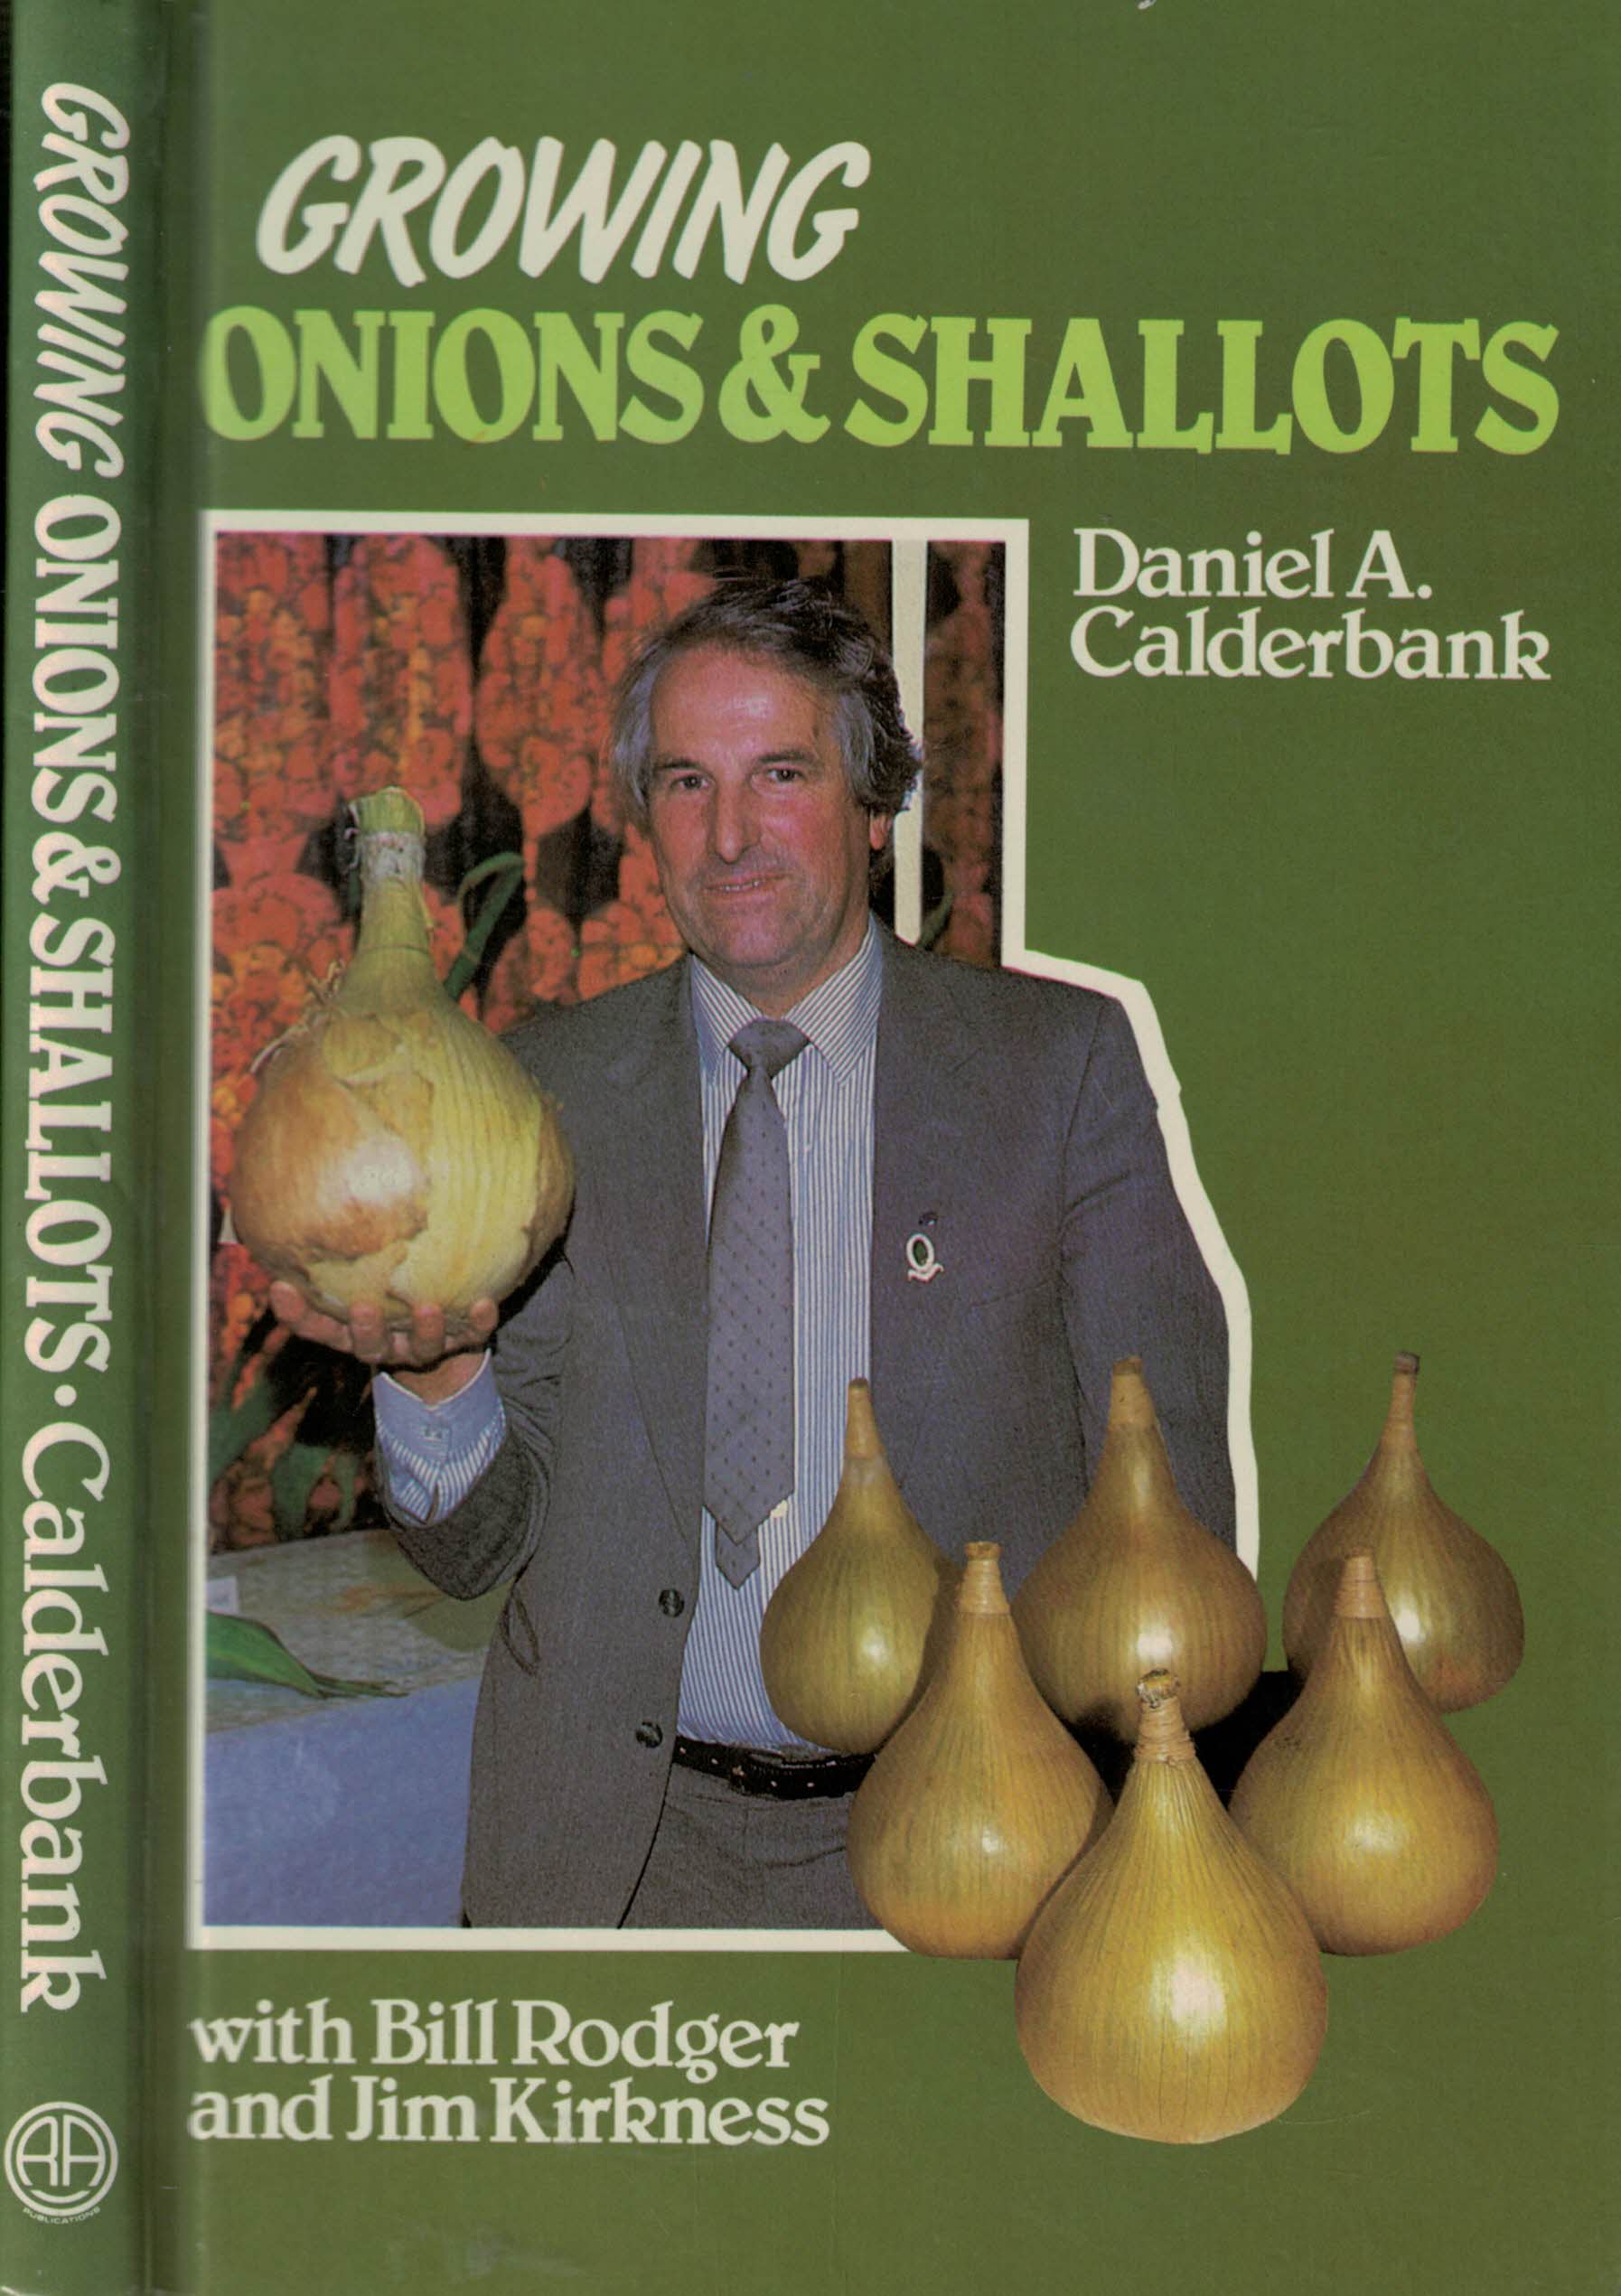 Growing Onions and Shallots. For Exhibition and Culinary Use. Signed copy.